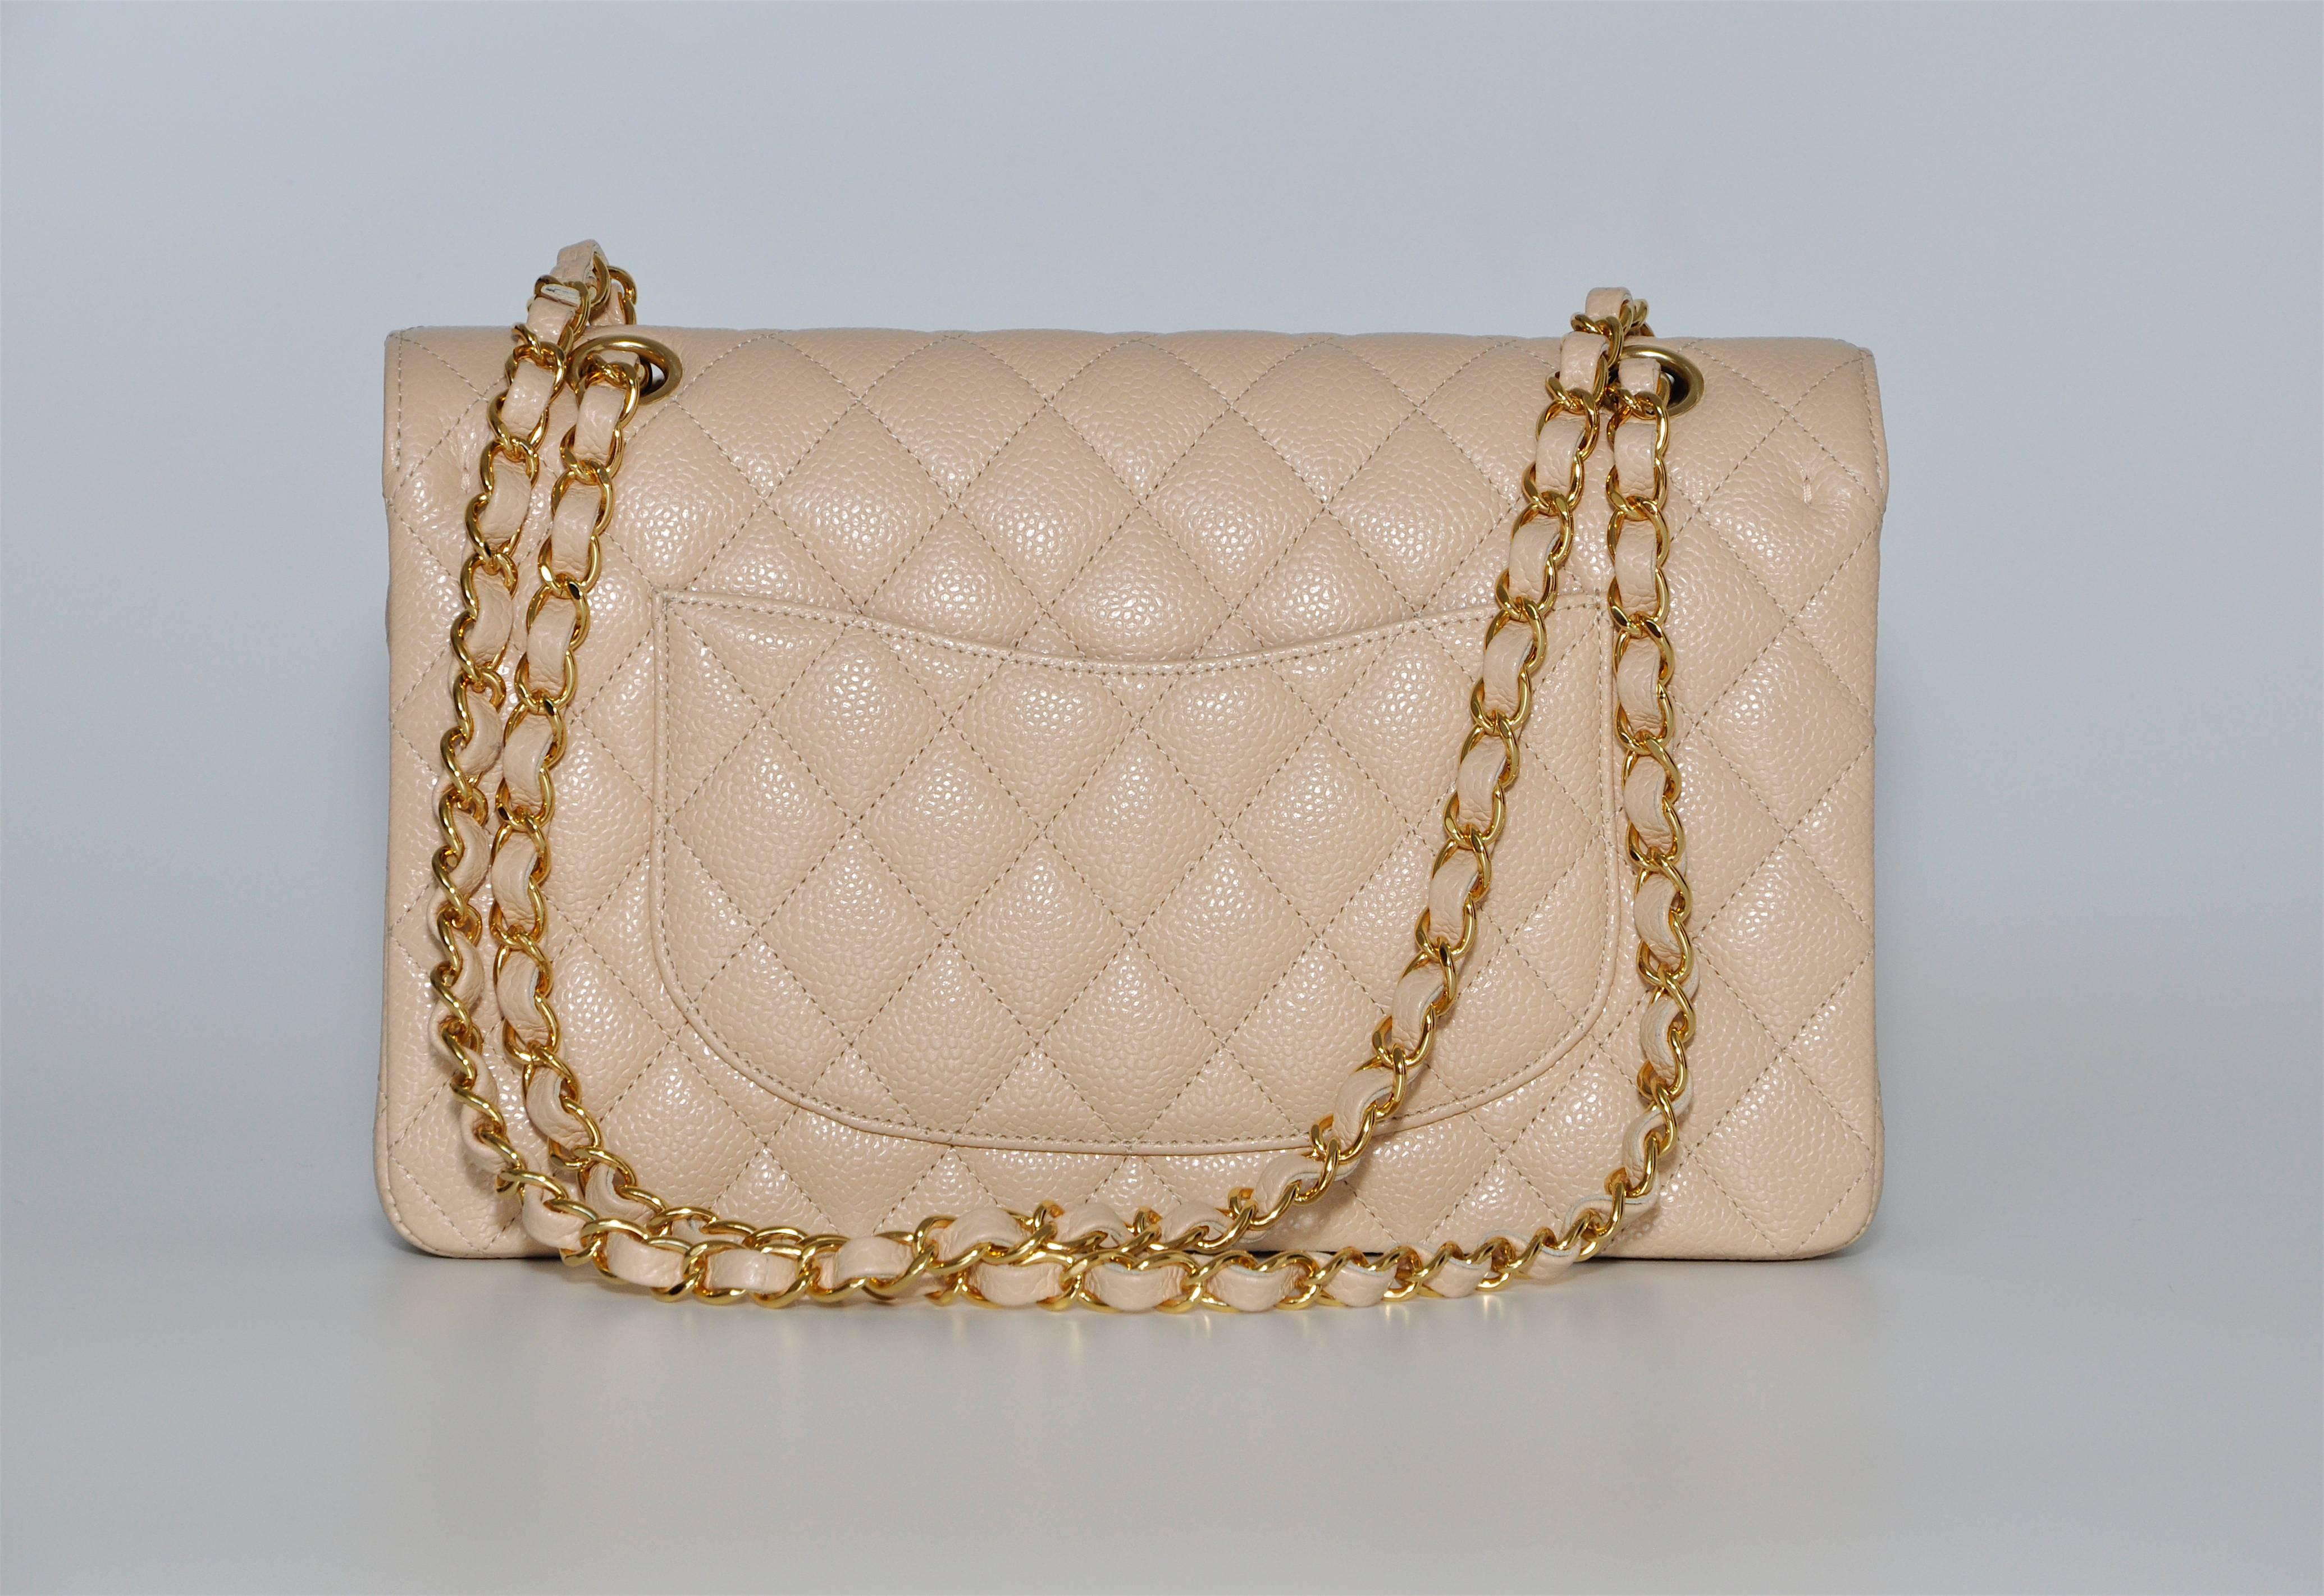 Contemporary Chanel Beige Double Flap Quilted Caviar Bag Handbag Gold Hardware